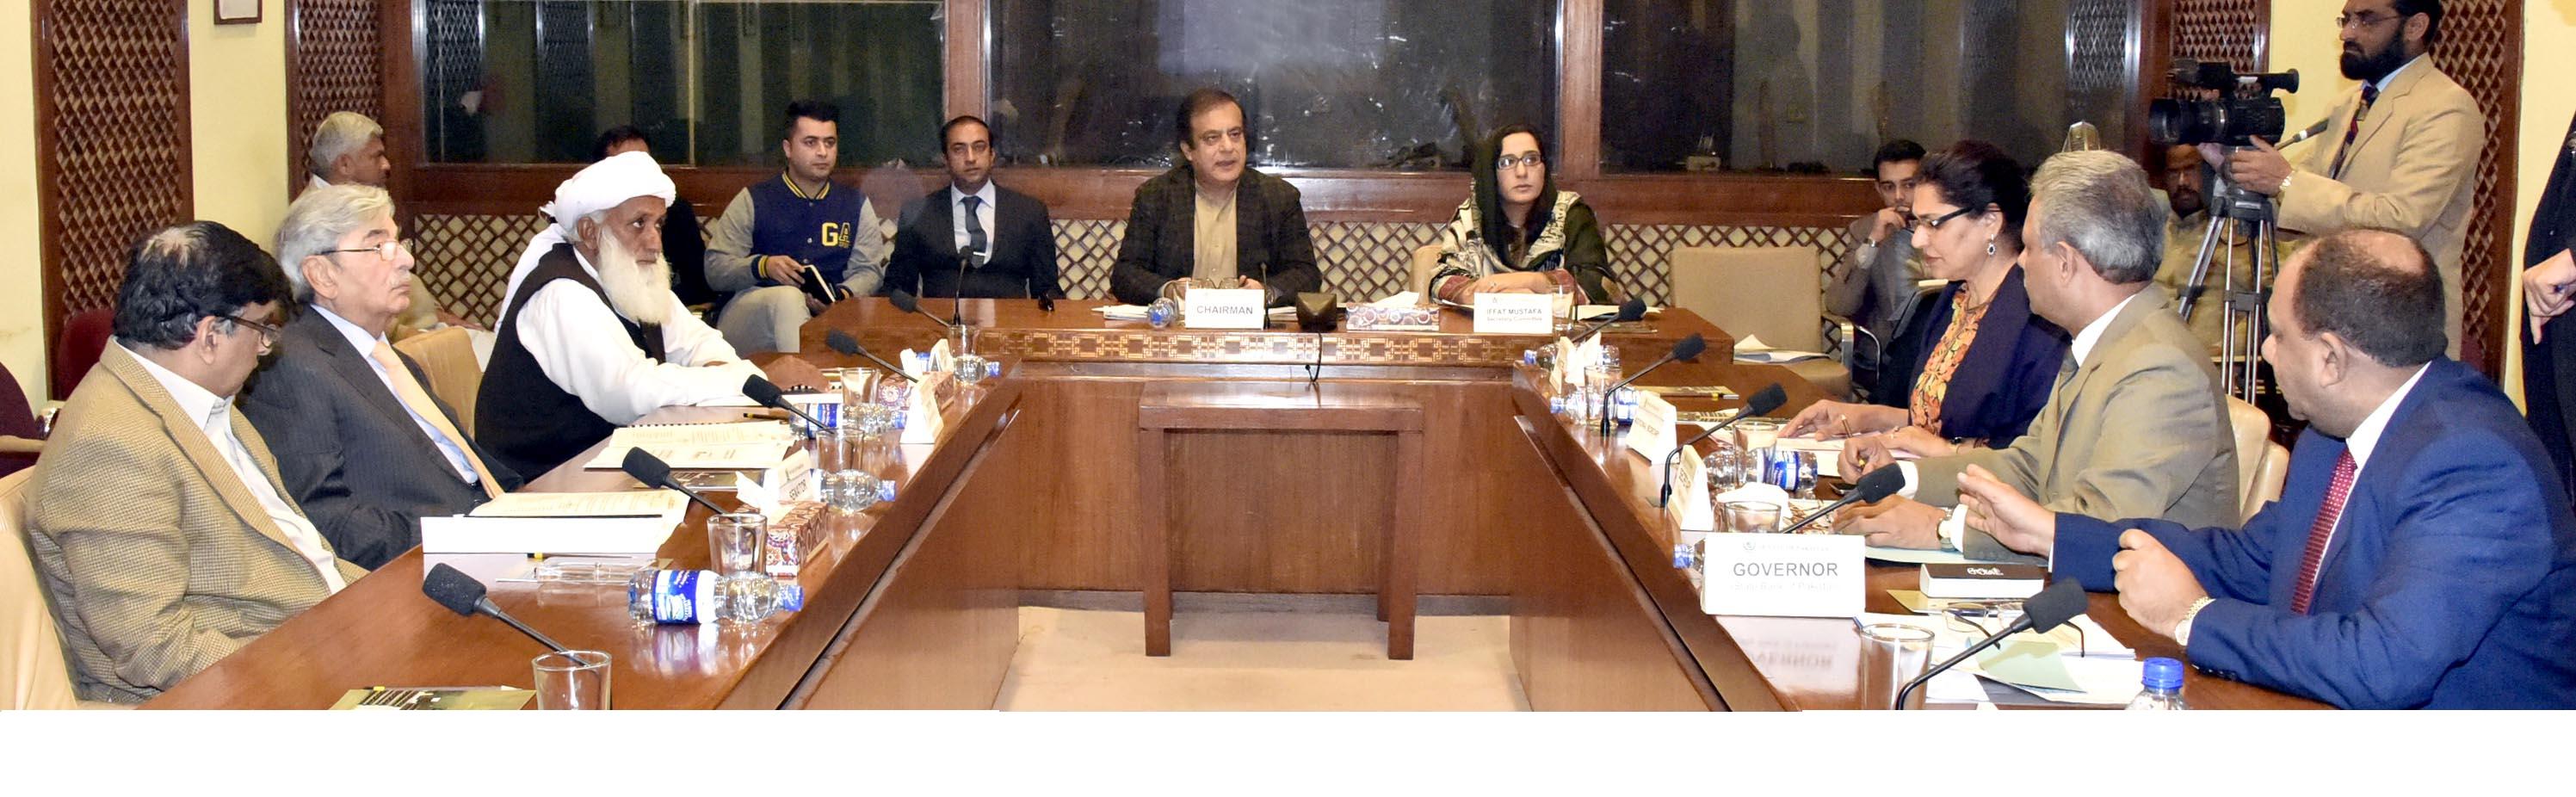 SENATOR SYED SHIBLI FARAZ, CHAIRMAN SENATE STANDING COMMITTEE ON COMMERCE AND TEXTILE INDUSTRY PRESIDING OVER A MEETING OF THE COMMITTEE AT PARLIAMENT HOUSE ISLAMABAD ON JANUARY 09, 2018.